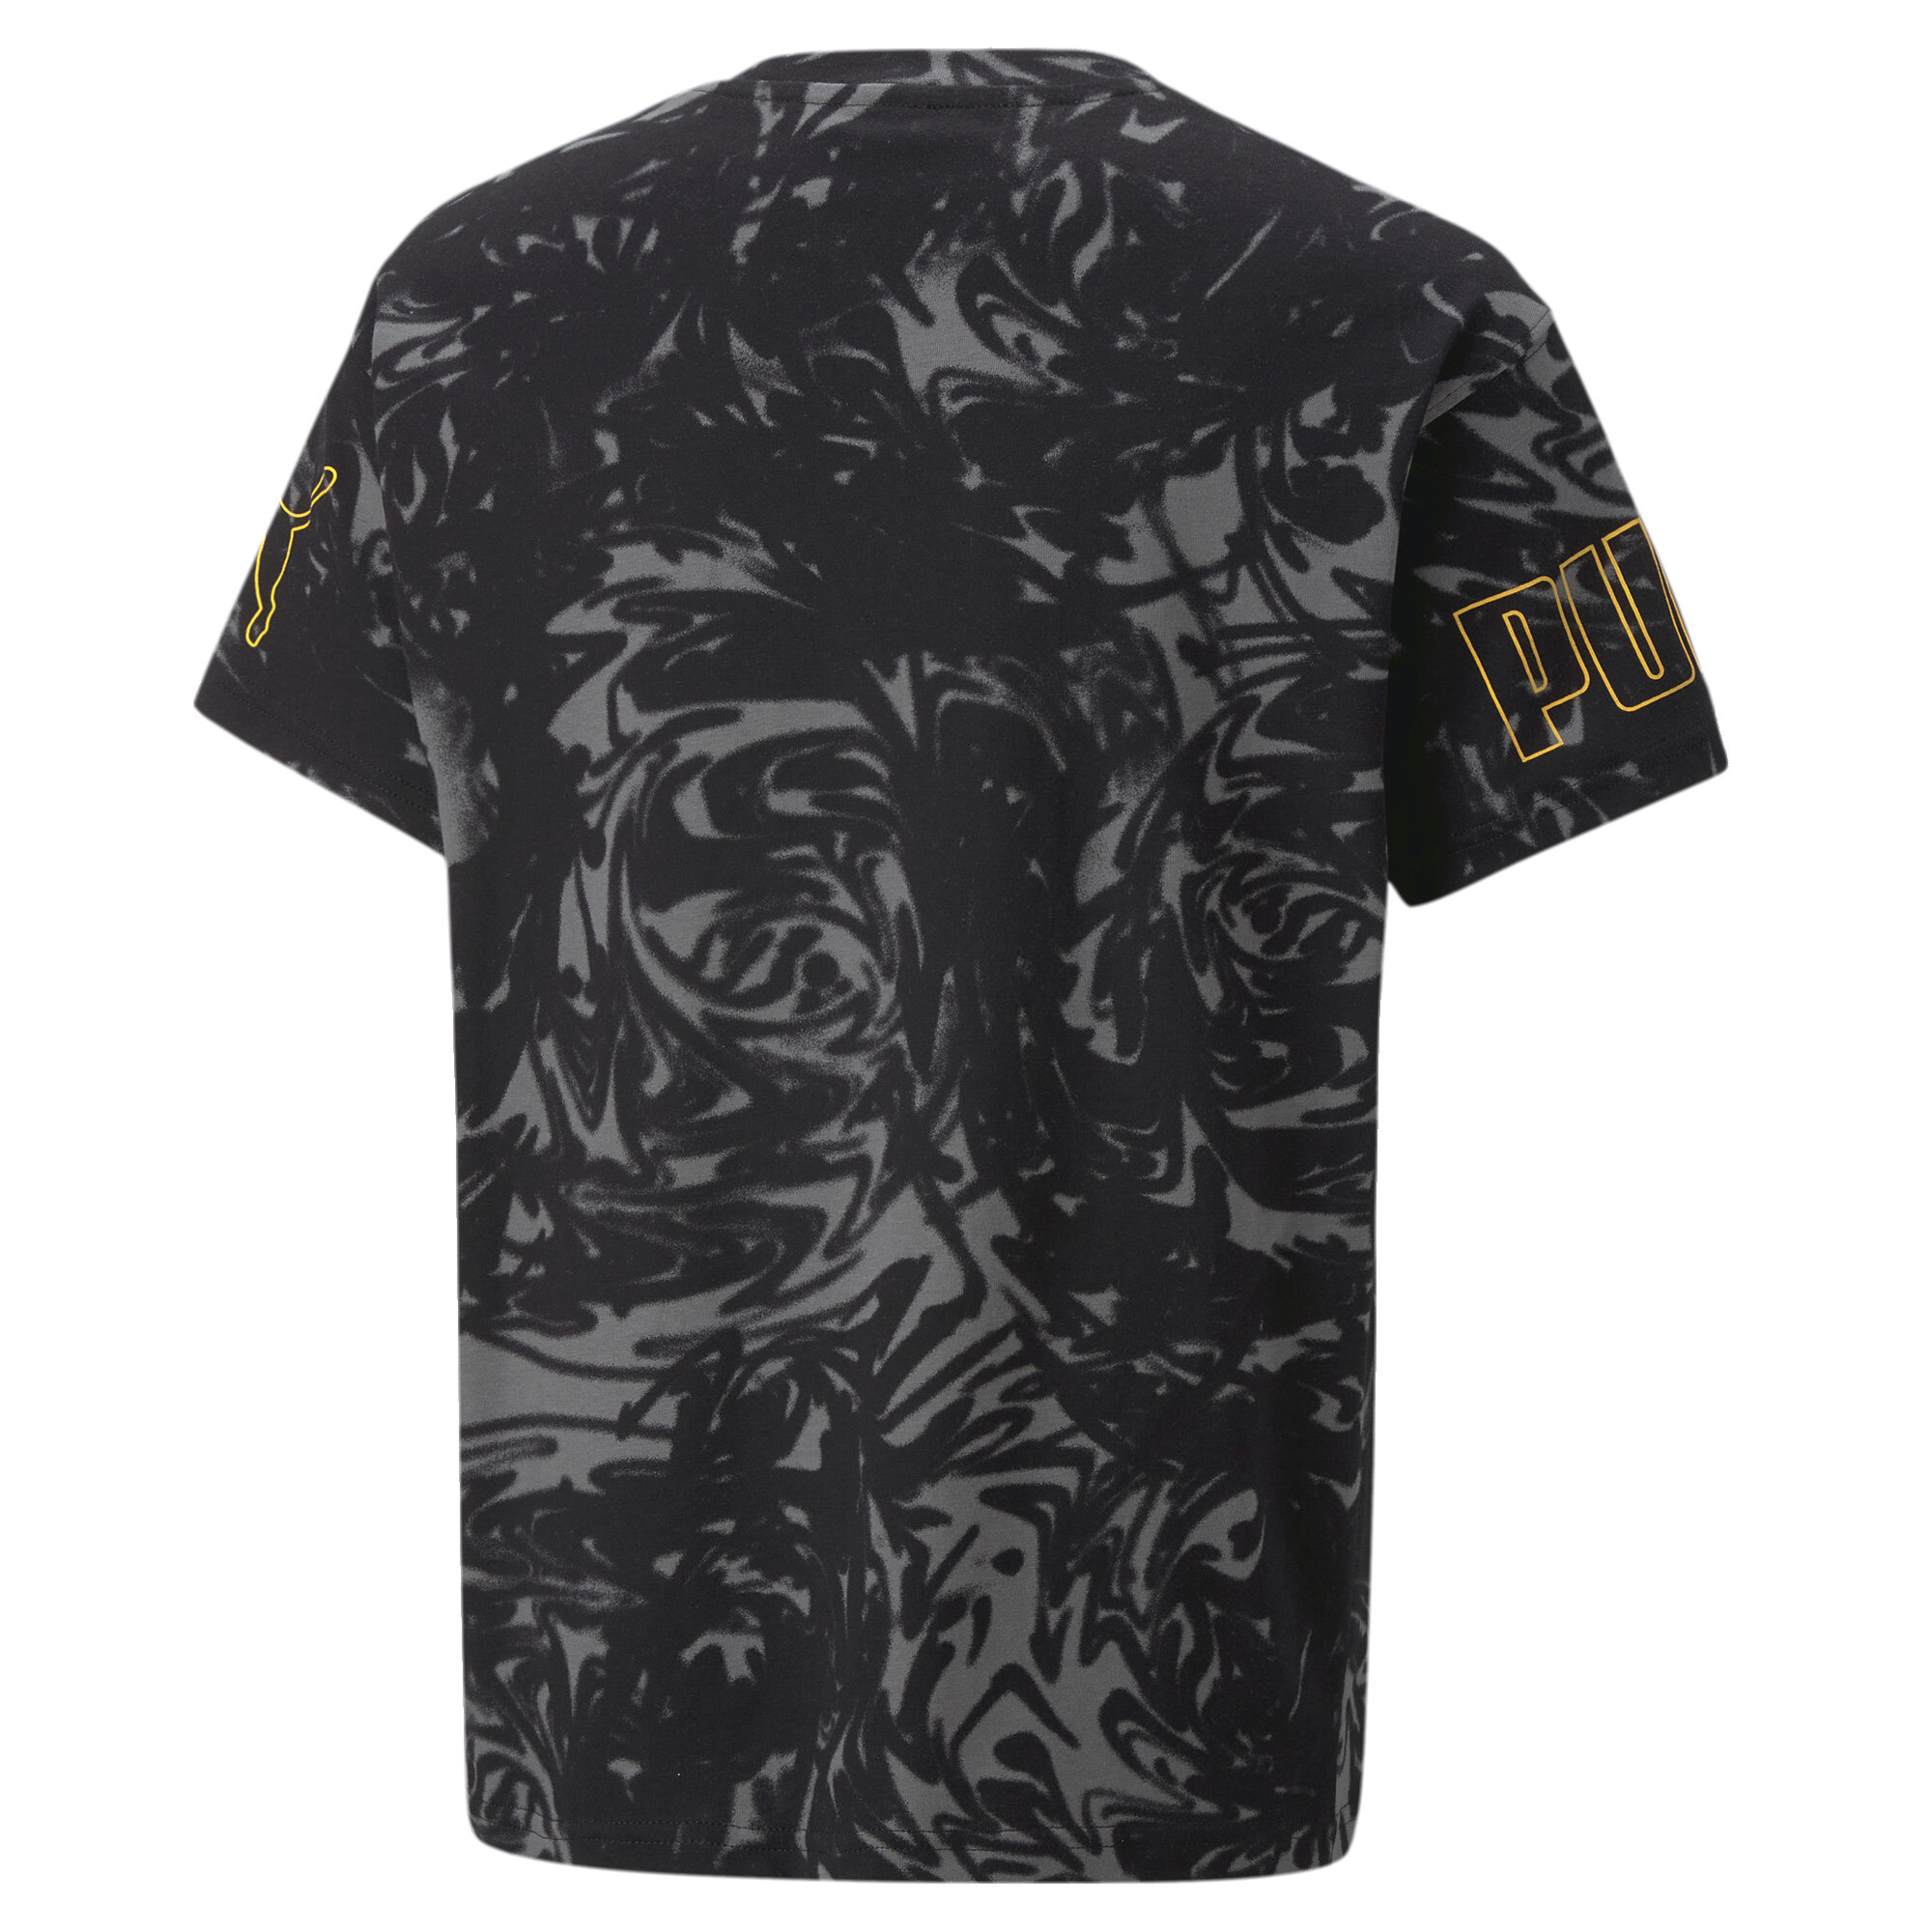 PUMA POWER SUMMER Printed T-Shirt In Black, Size 7-8 Youth